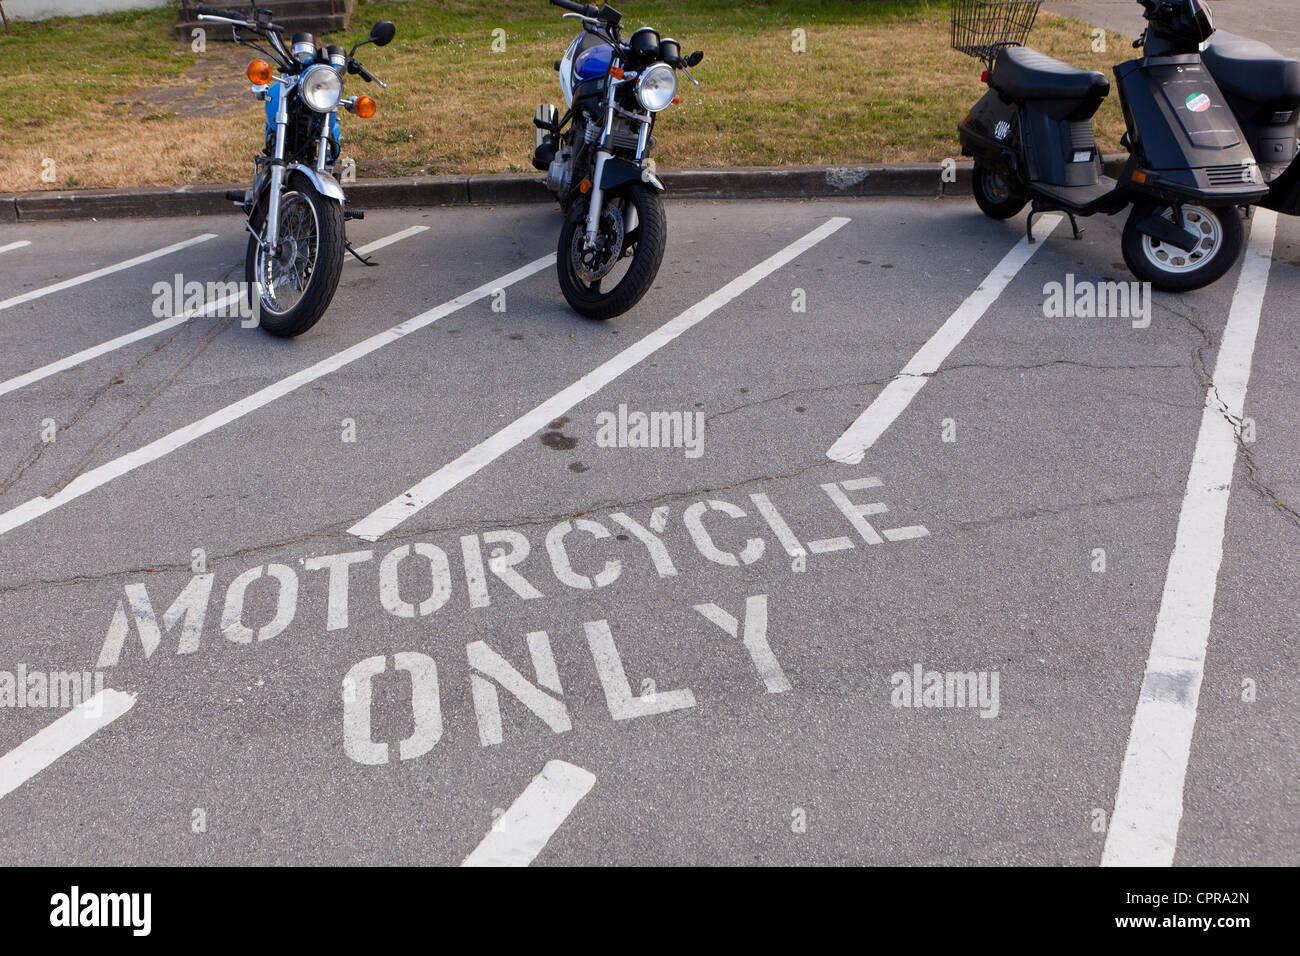 Motorcycle parking only sign Stock Photo